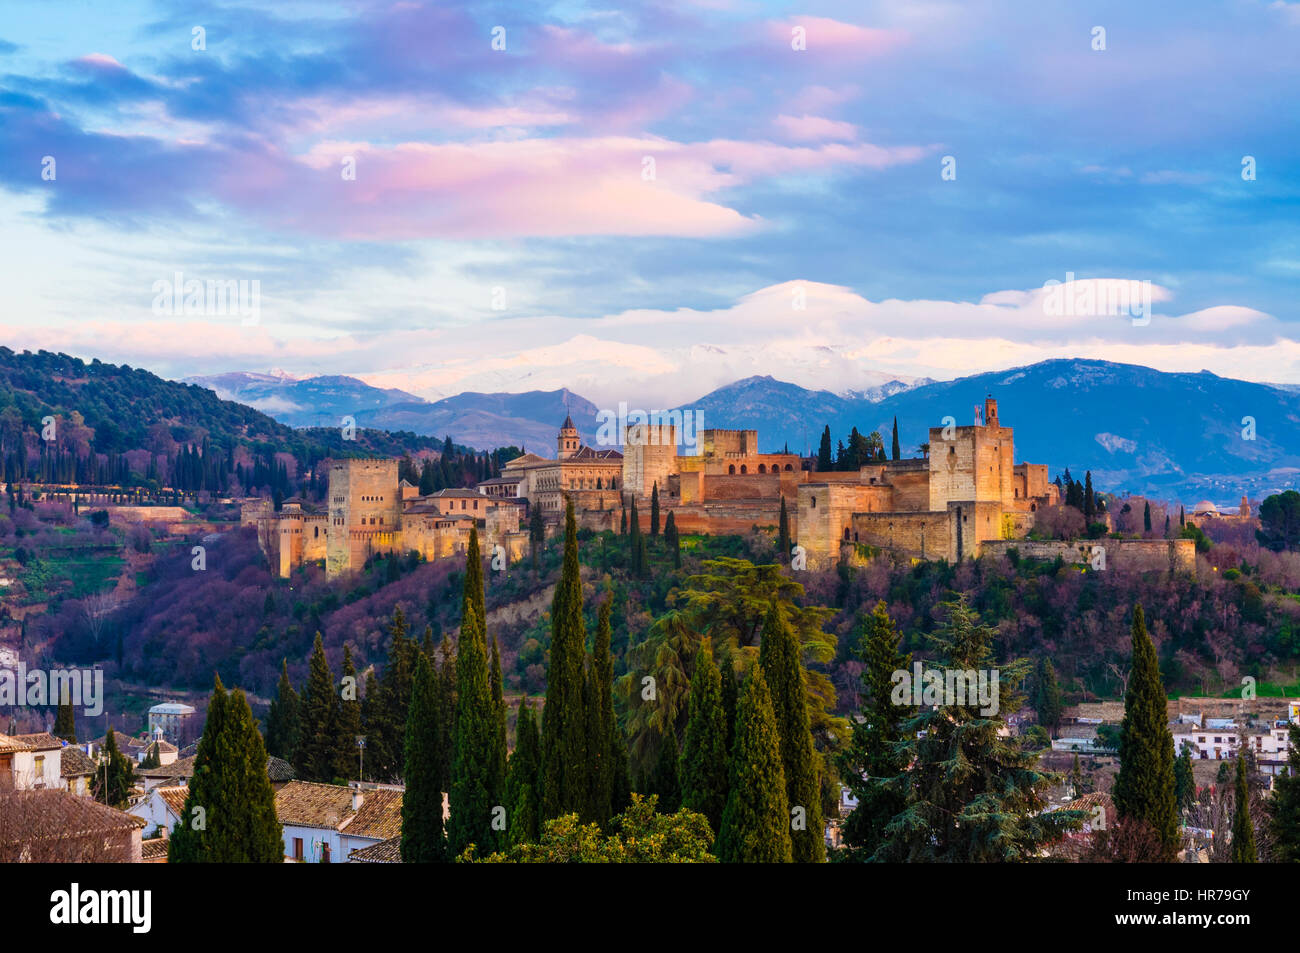 Alhambra palace at sunset with snow-capped Sierra Nevada mountains in background. Granada, Andalusia, Spain Stock Photo